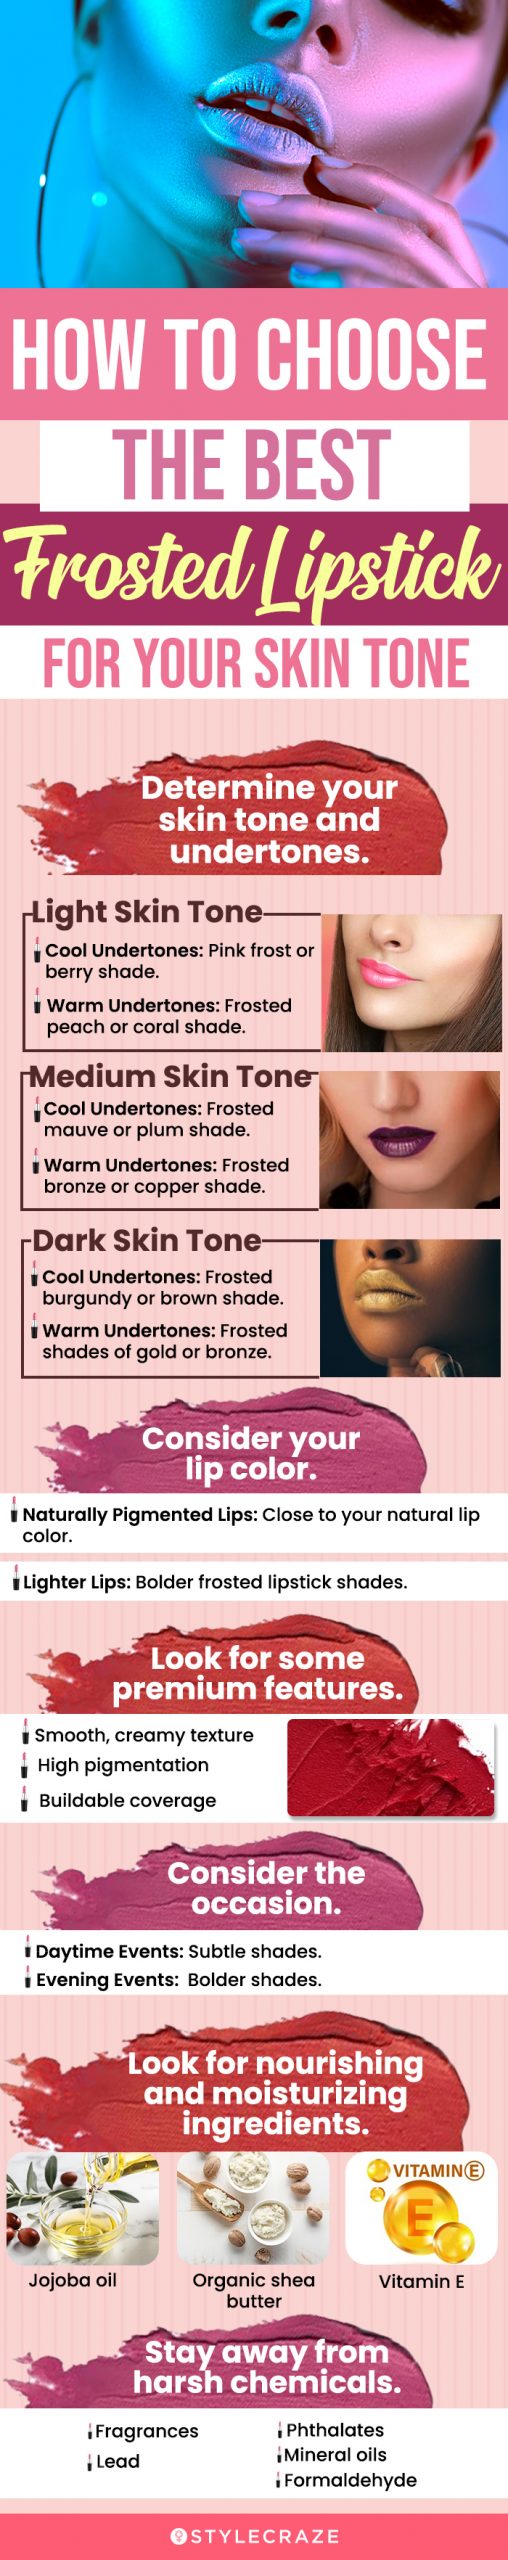 Best Frosted Lipstick for Your Skin Tone (infographic)